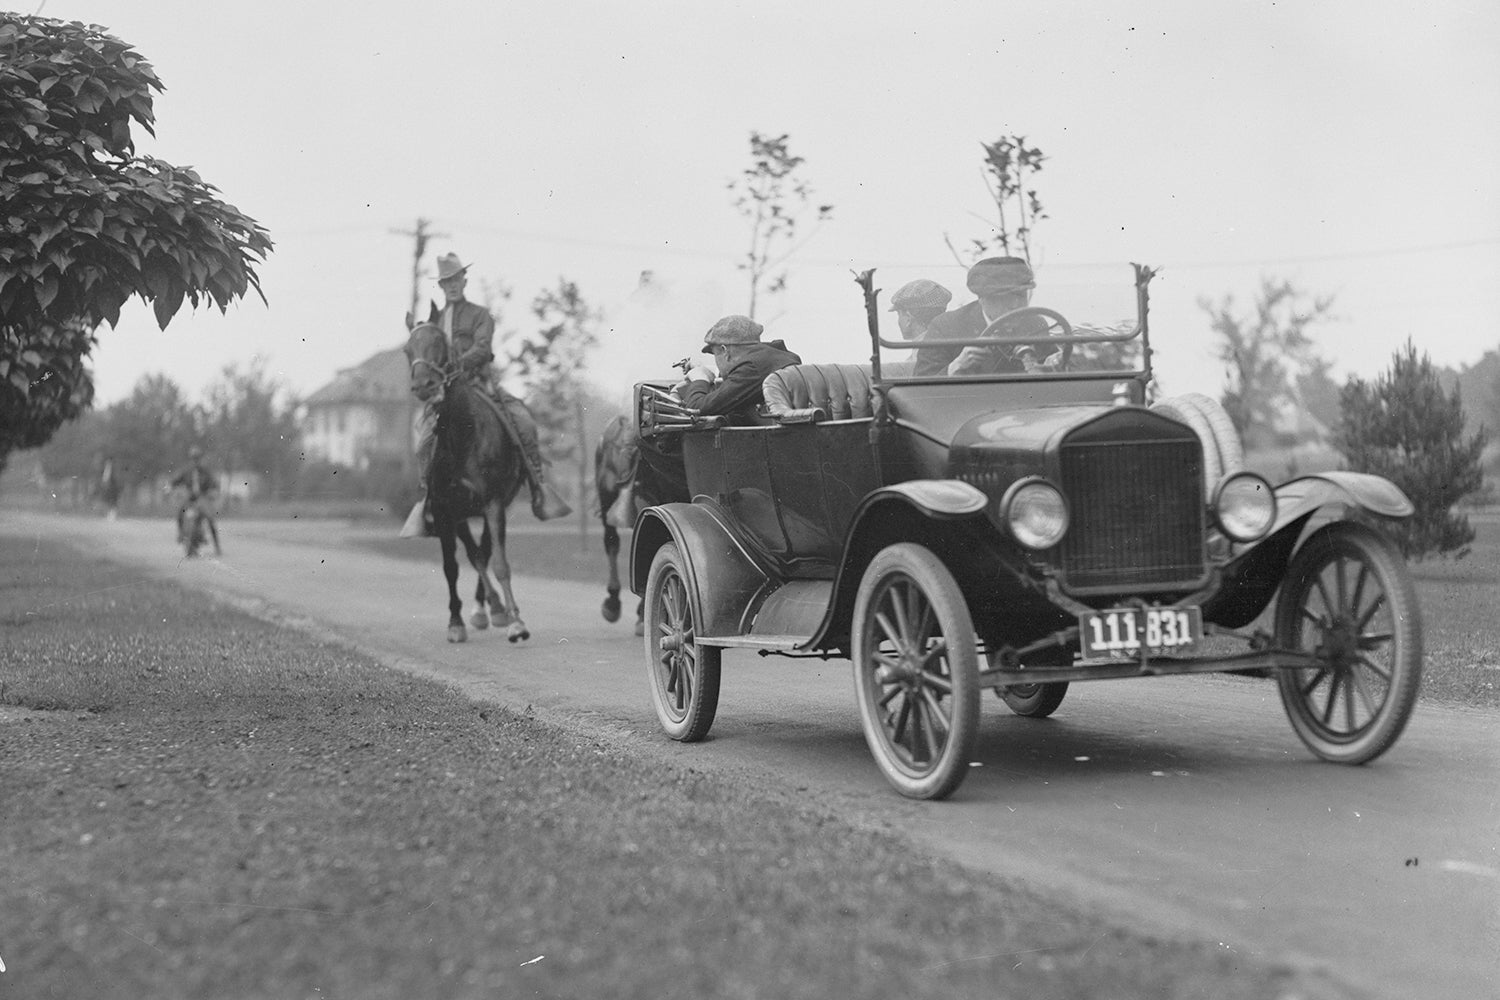 vintage photo of police on horse chasing car